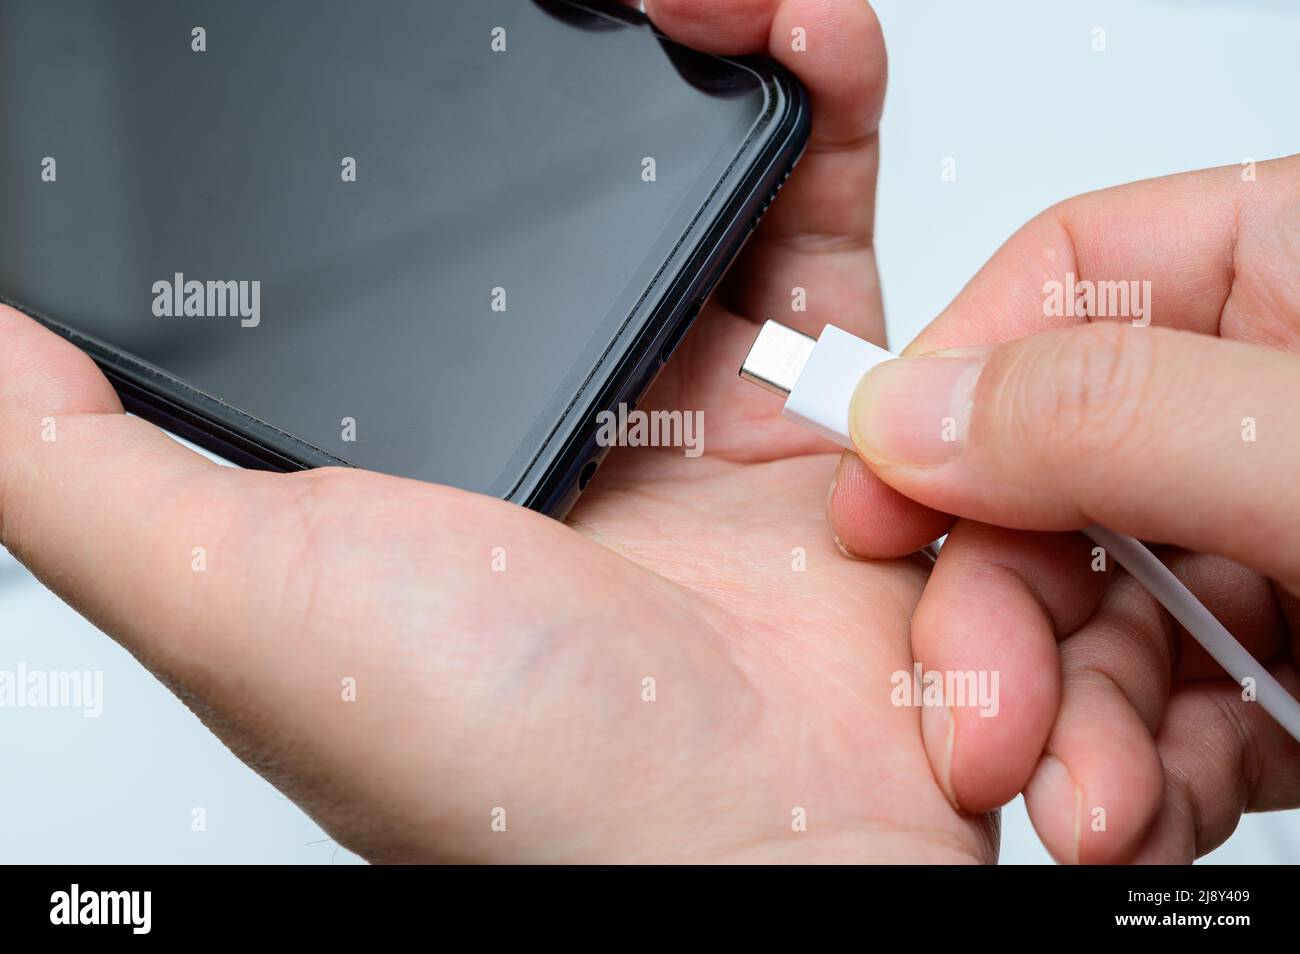 Man's hand connecting type-c cable to smartphone. Stock Photo